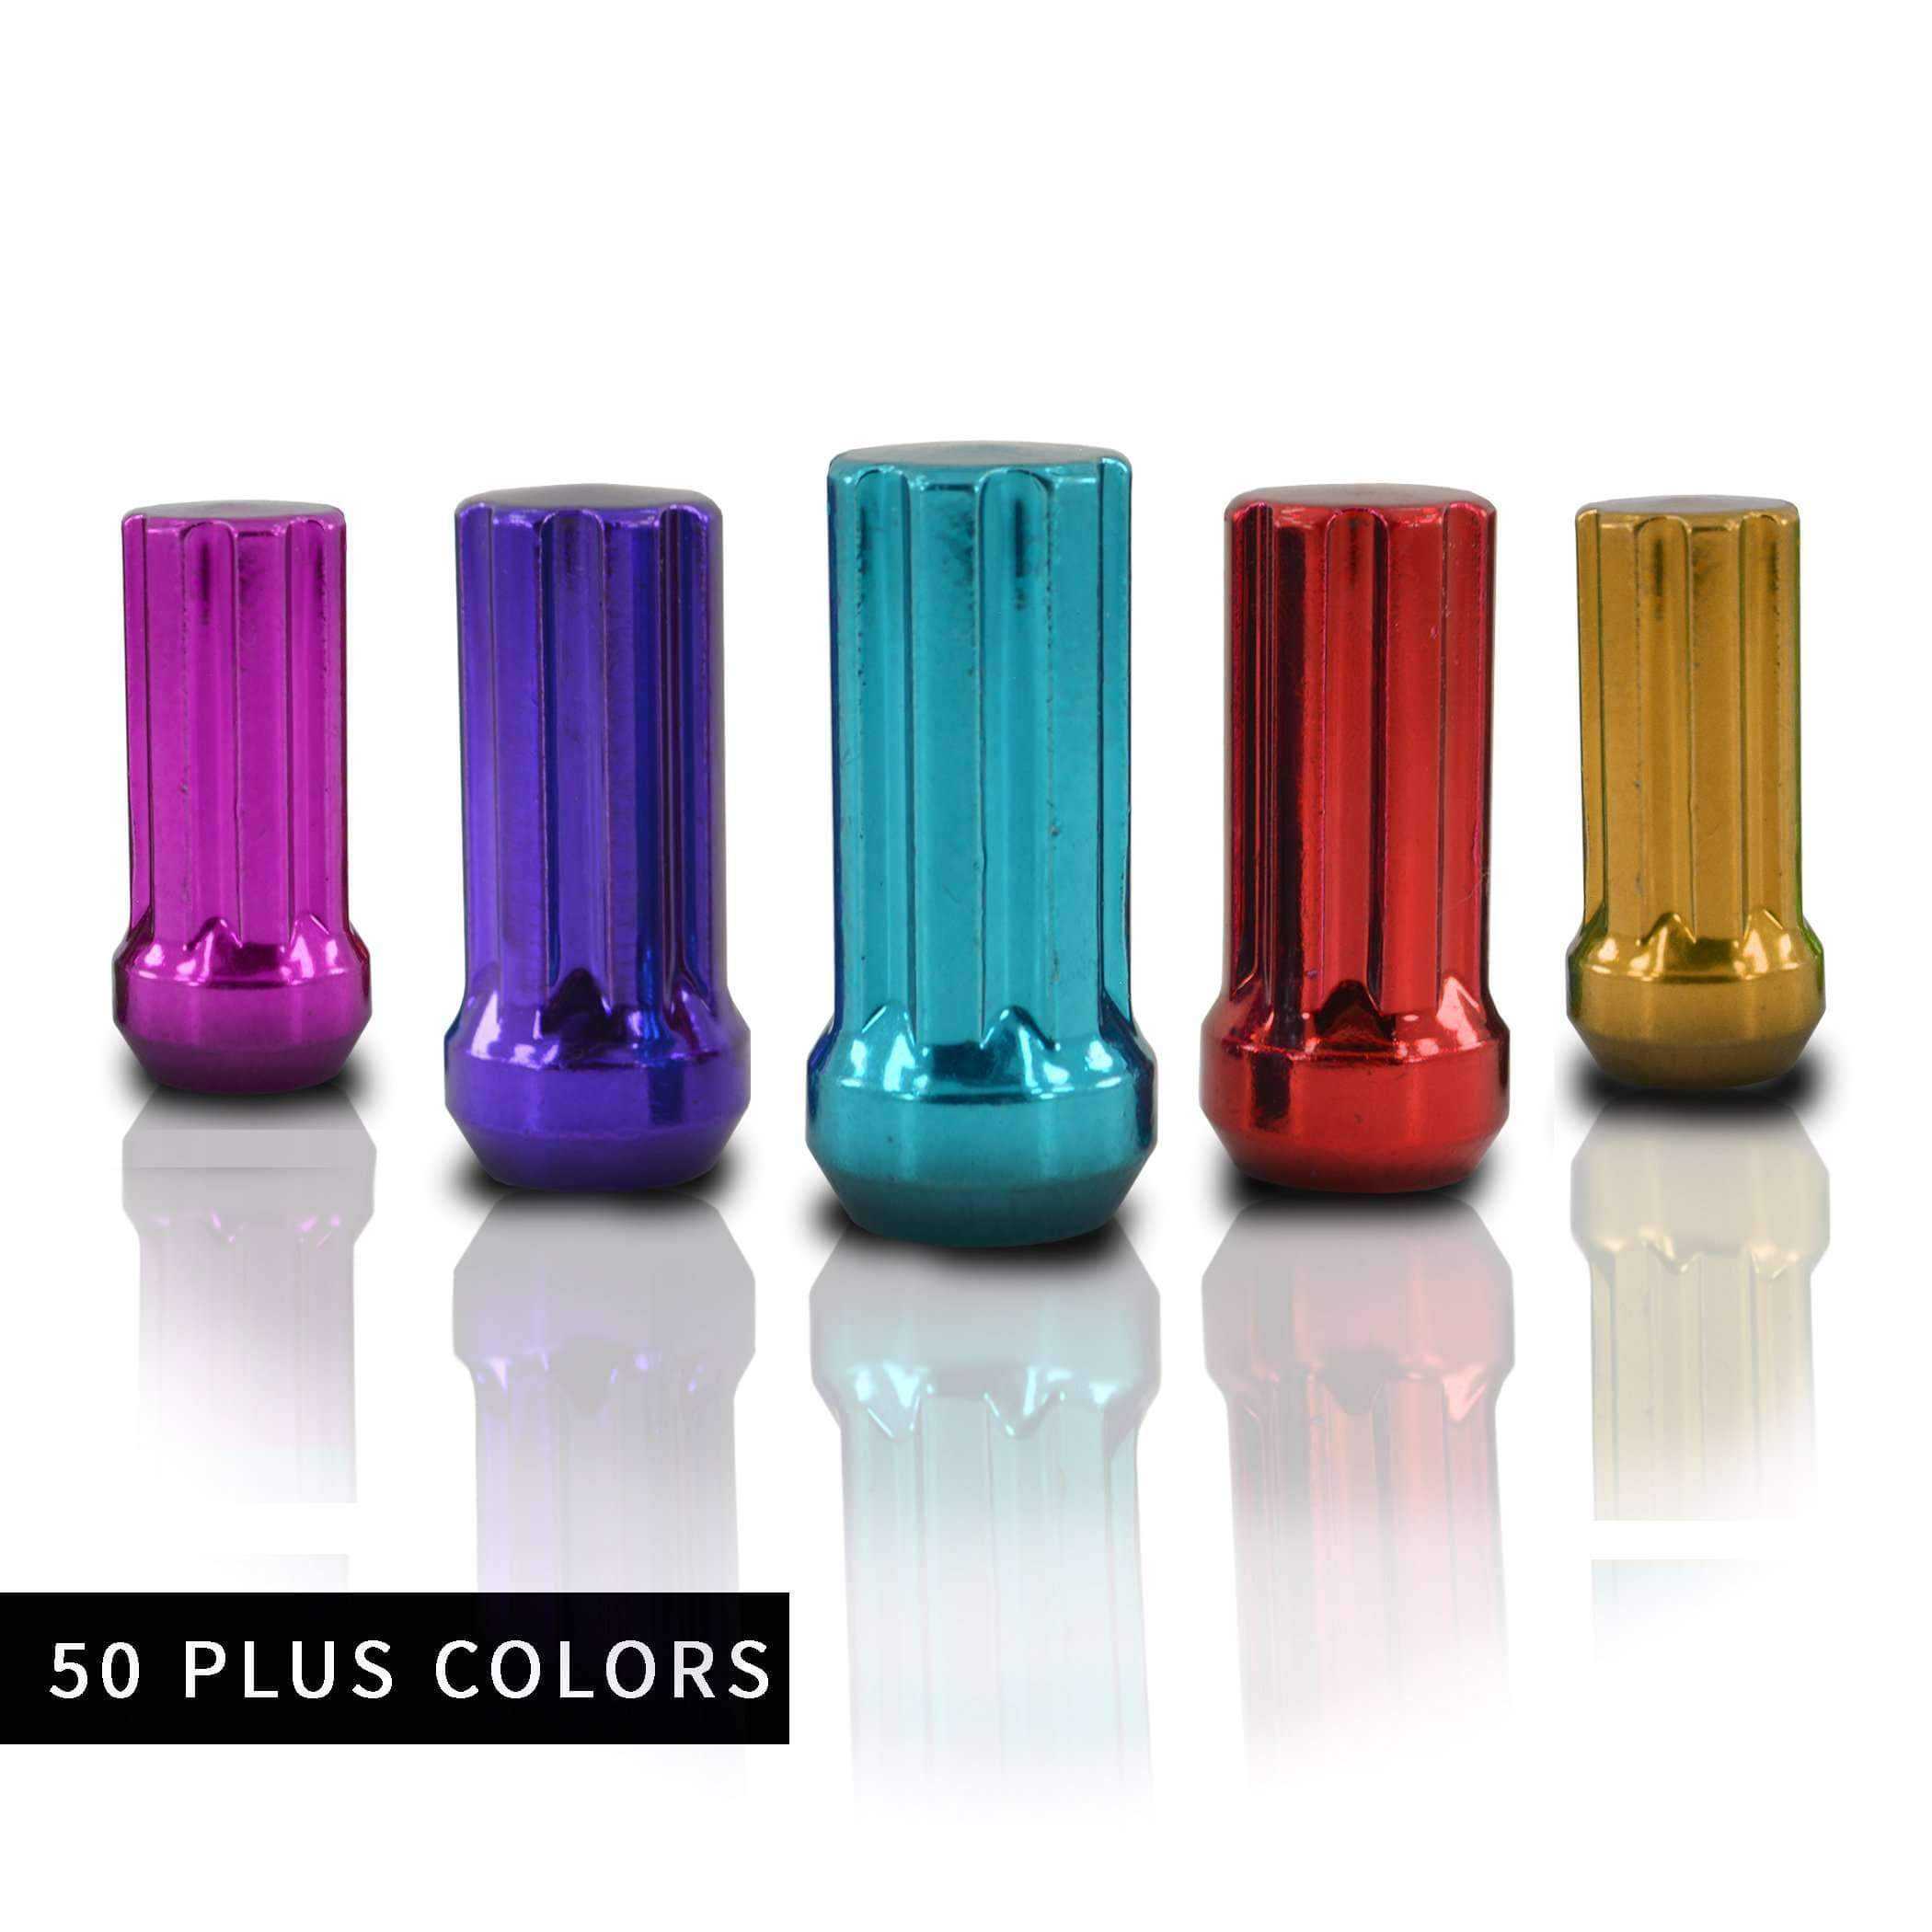 32 pc 14x1.5 main picture 7 Spline Duplex security lug nuts 2" Tall For Aftermarket Wheels powder coated durable coating